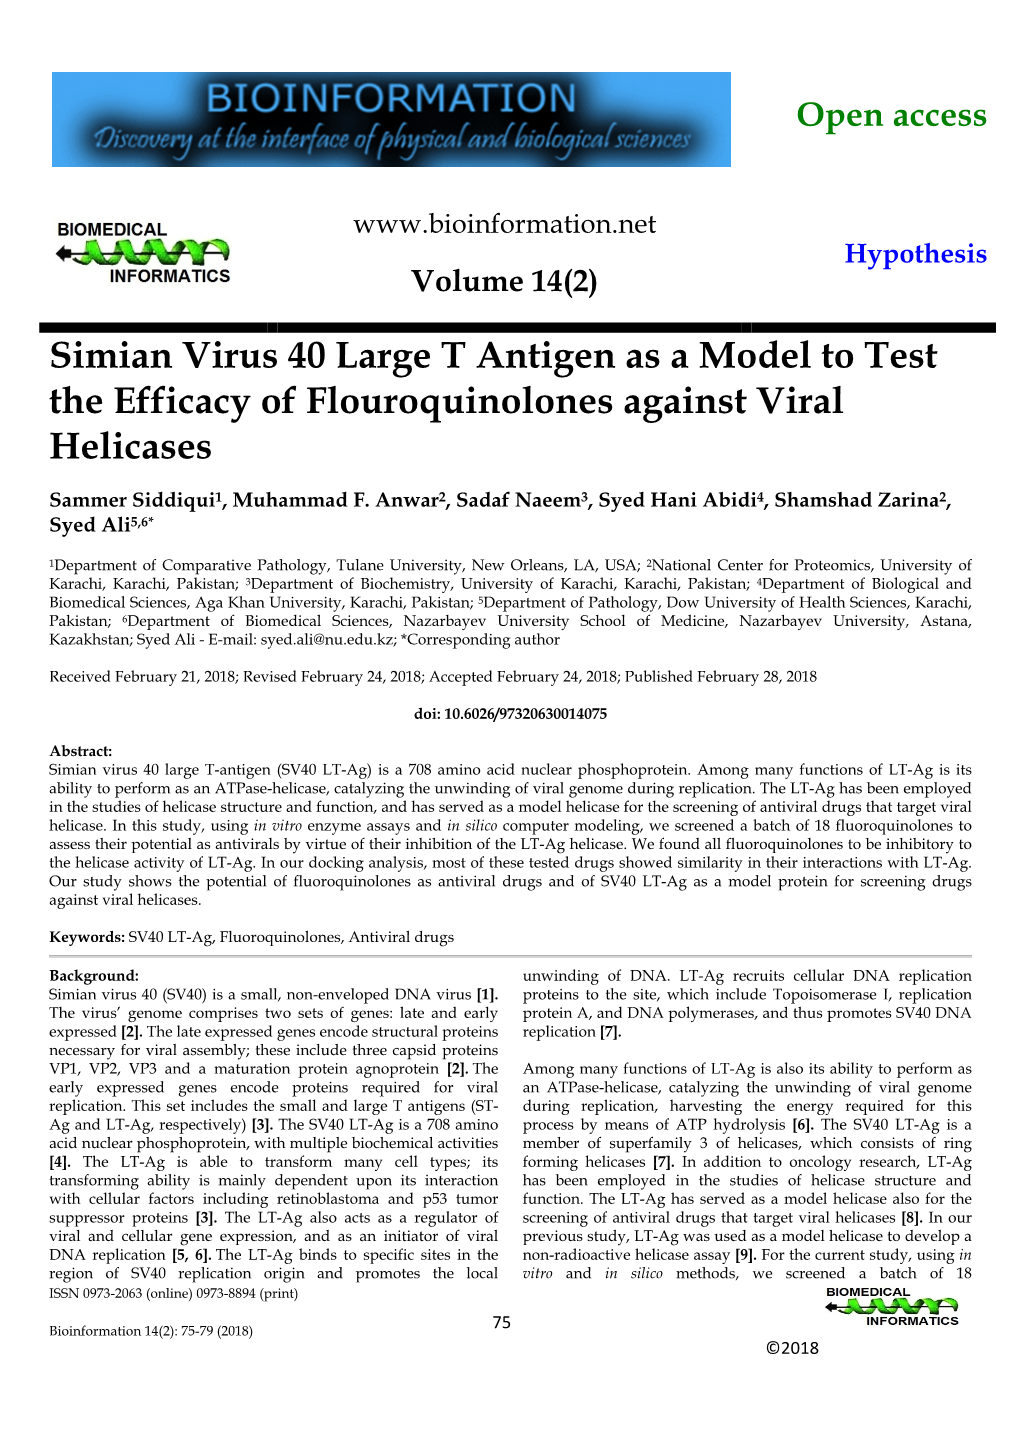 Simian Virus 40 Large T Antigen As a Model to Test the Efficacy of Flouroquinolones Against Viral Helicases